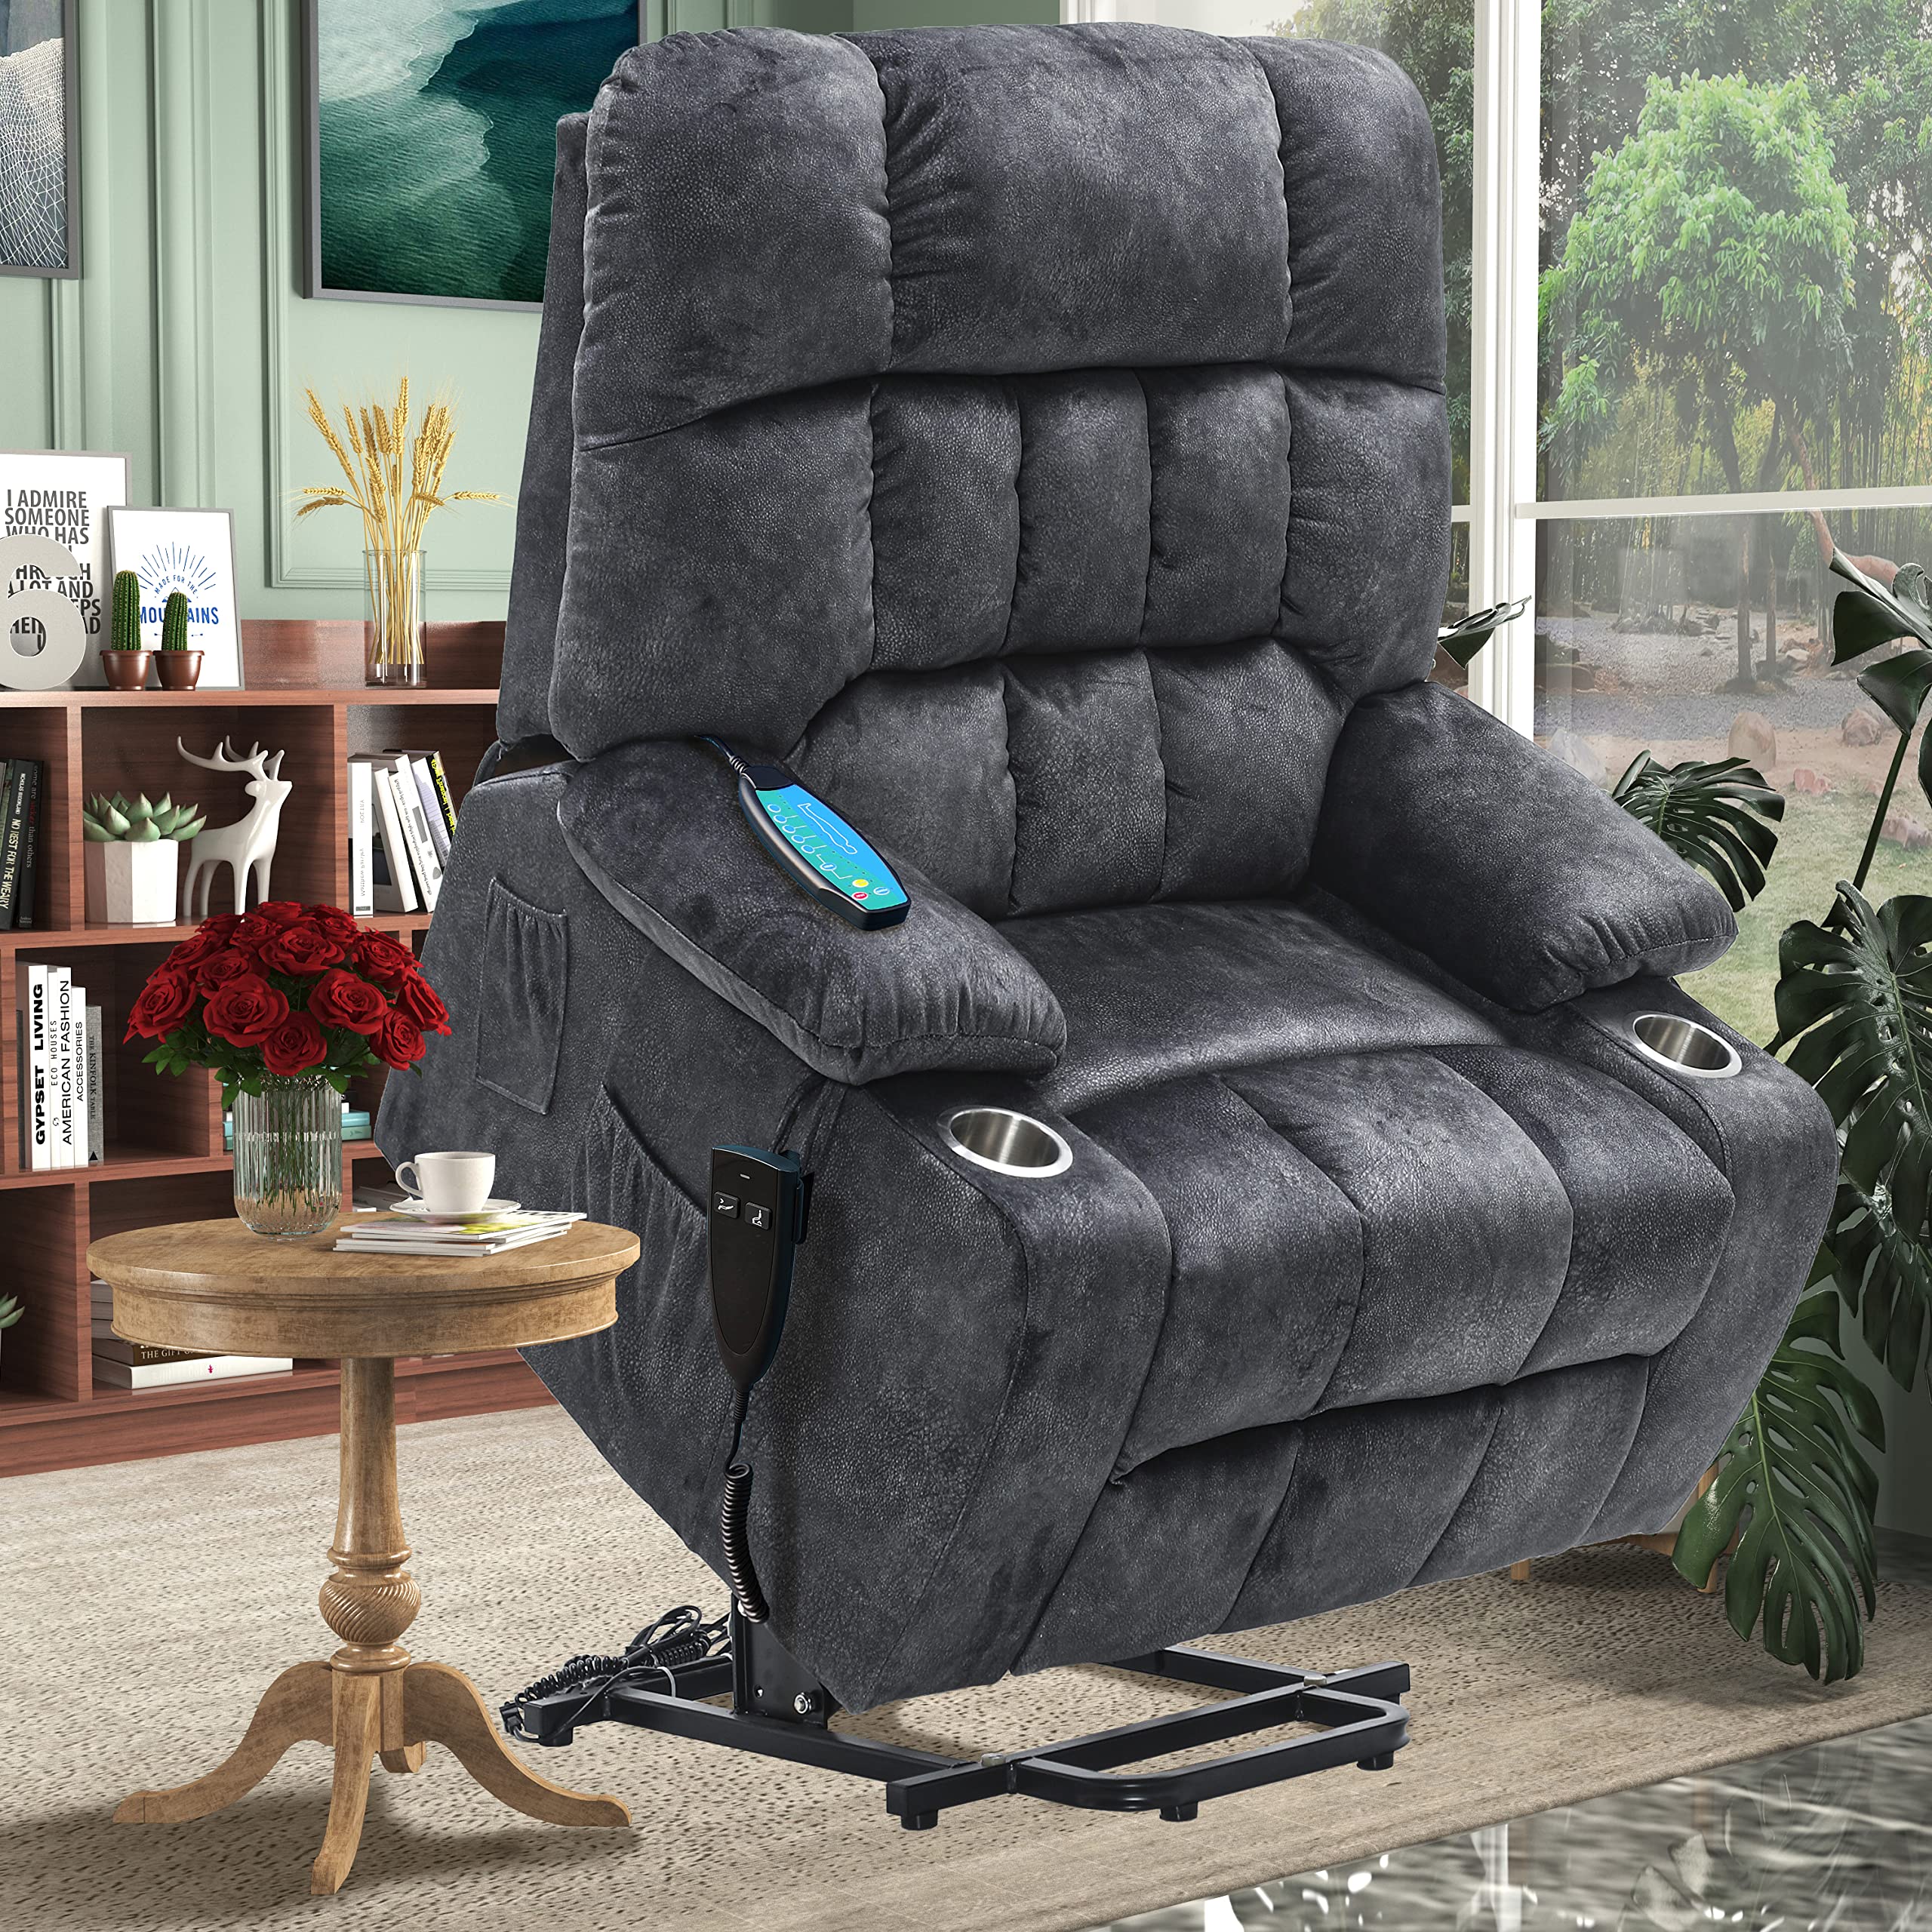 PUg258Y Lift chair for Big and Tall Person with Inconvenient Legs: High Density Foam Lift Sofa with Heat and Massage, 2 Pockets,